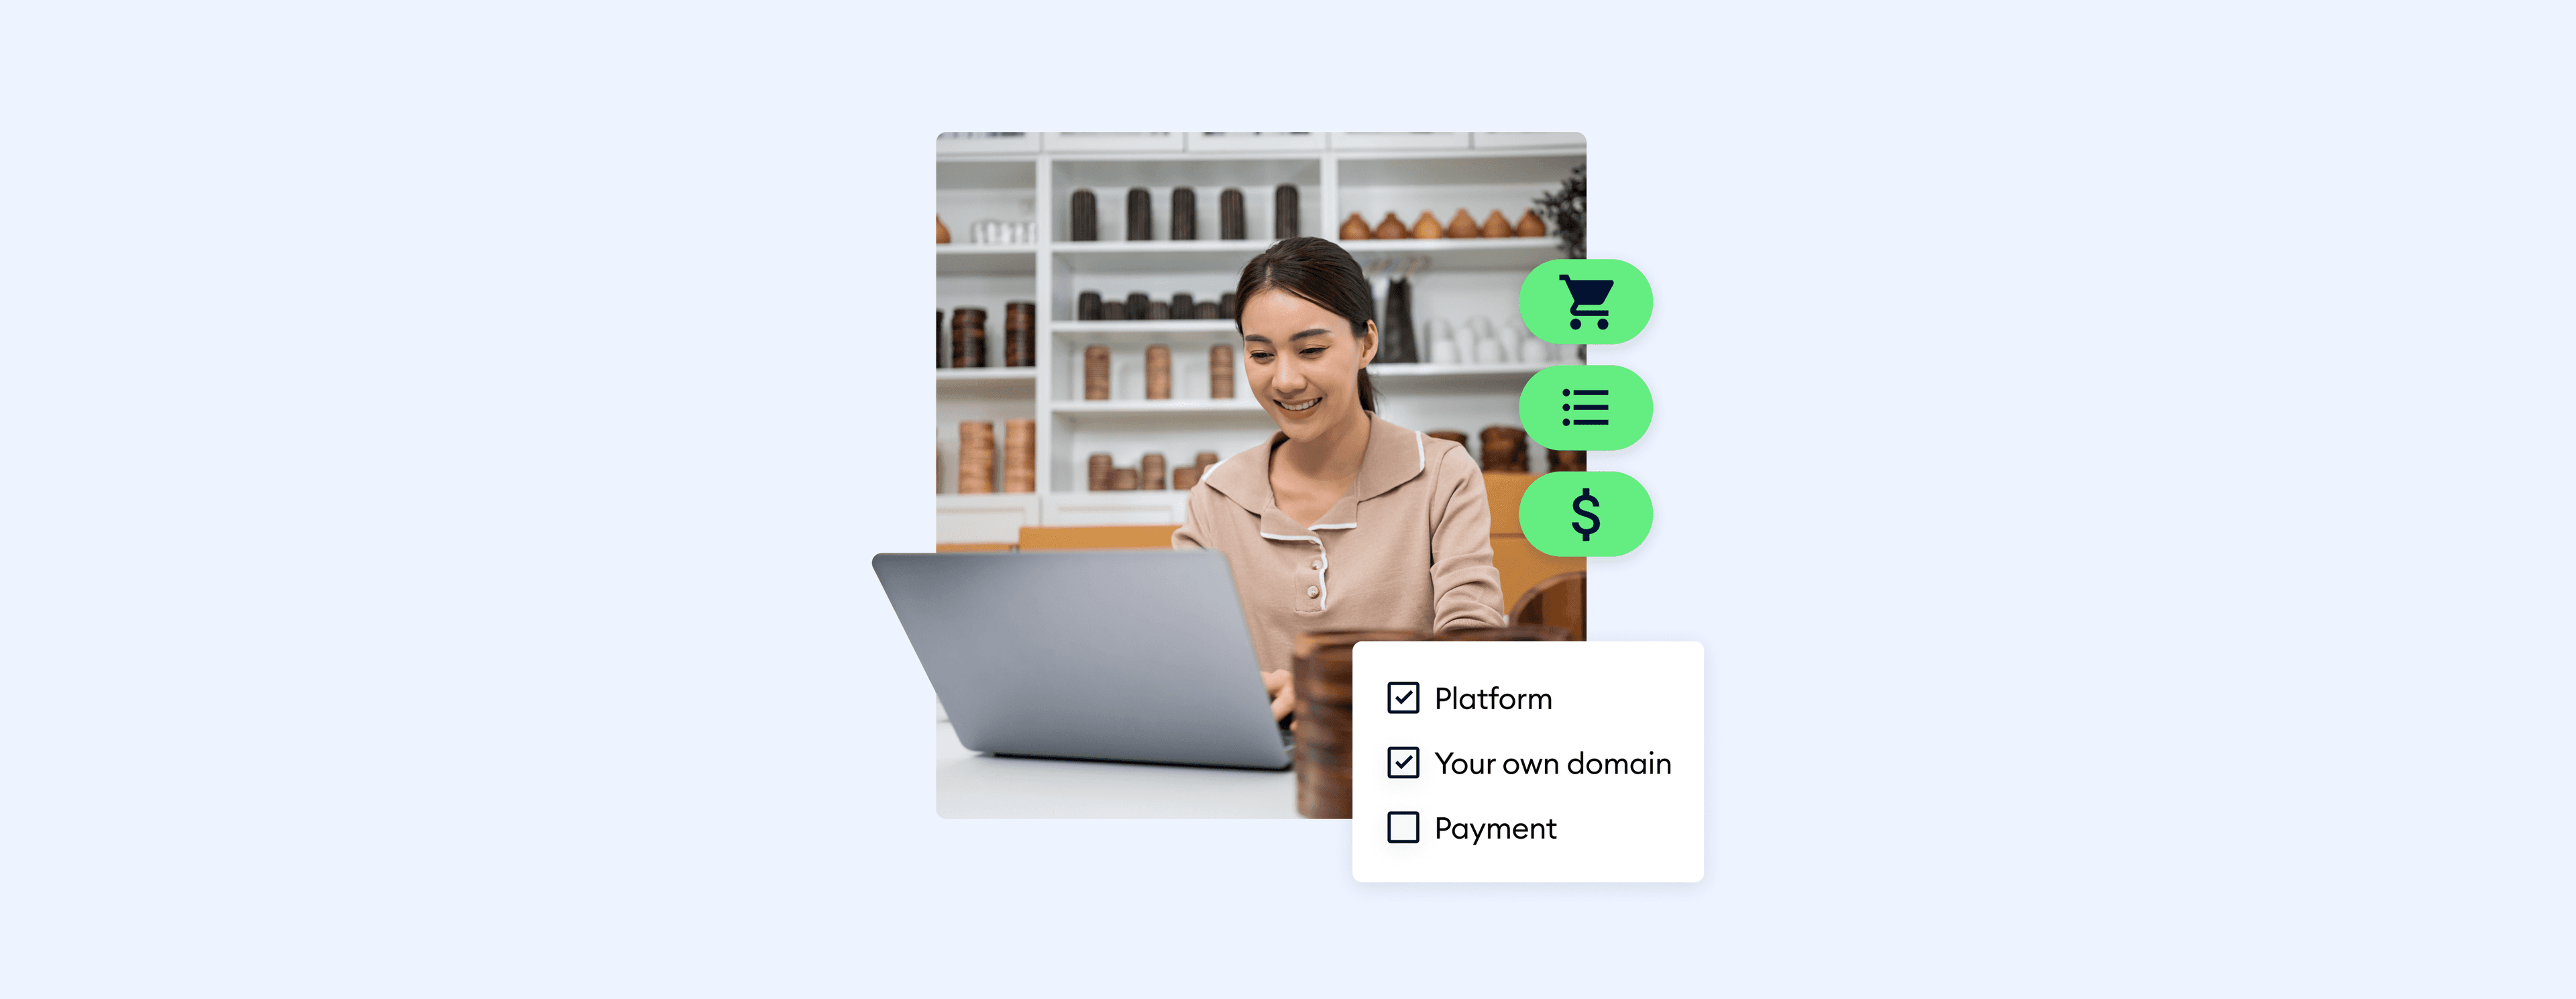 ecommerce launch checklist cover image